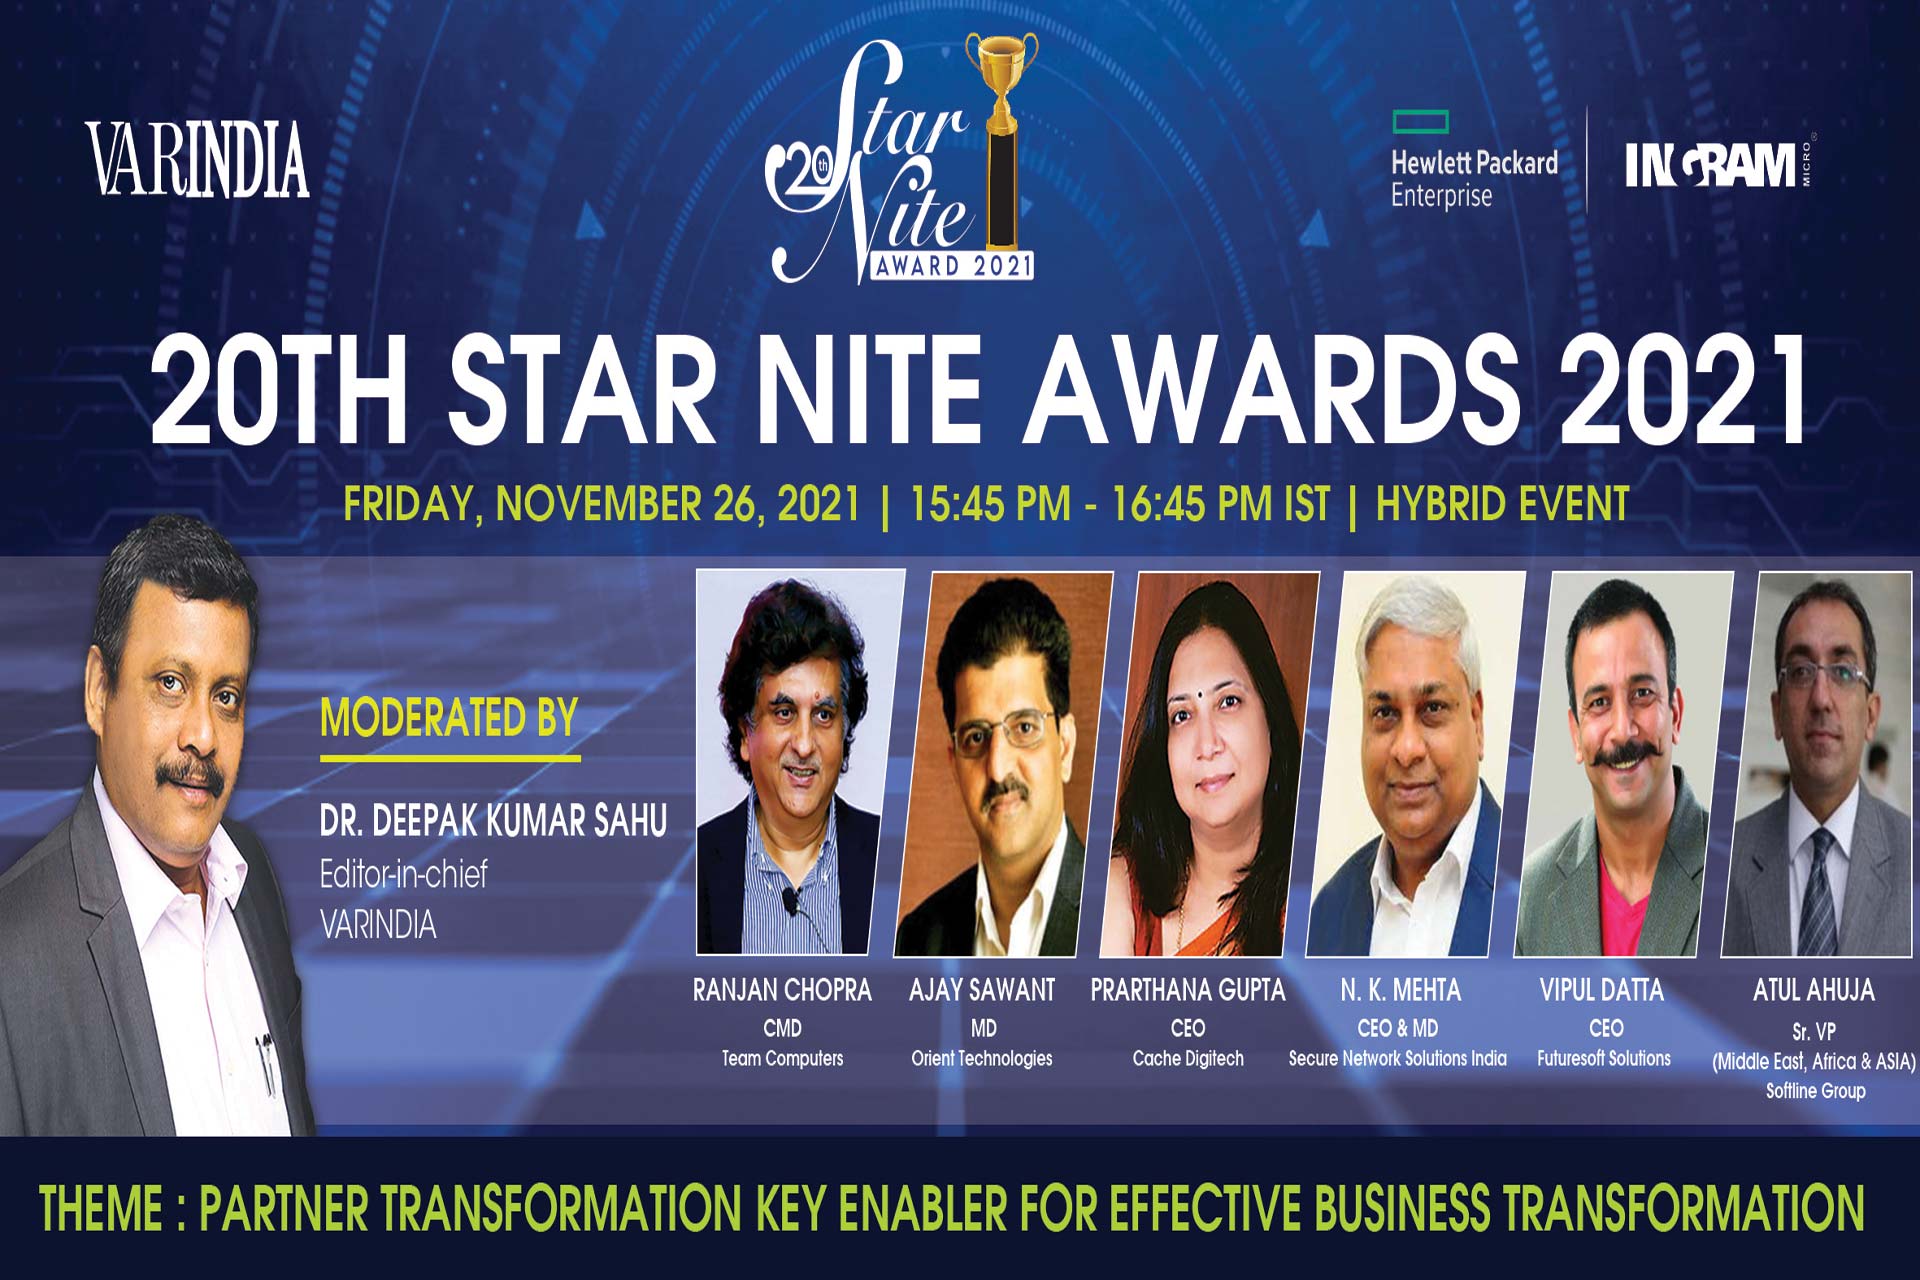 Panel Discussion Session - VARs at 20th Star Nite Awards 2021